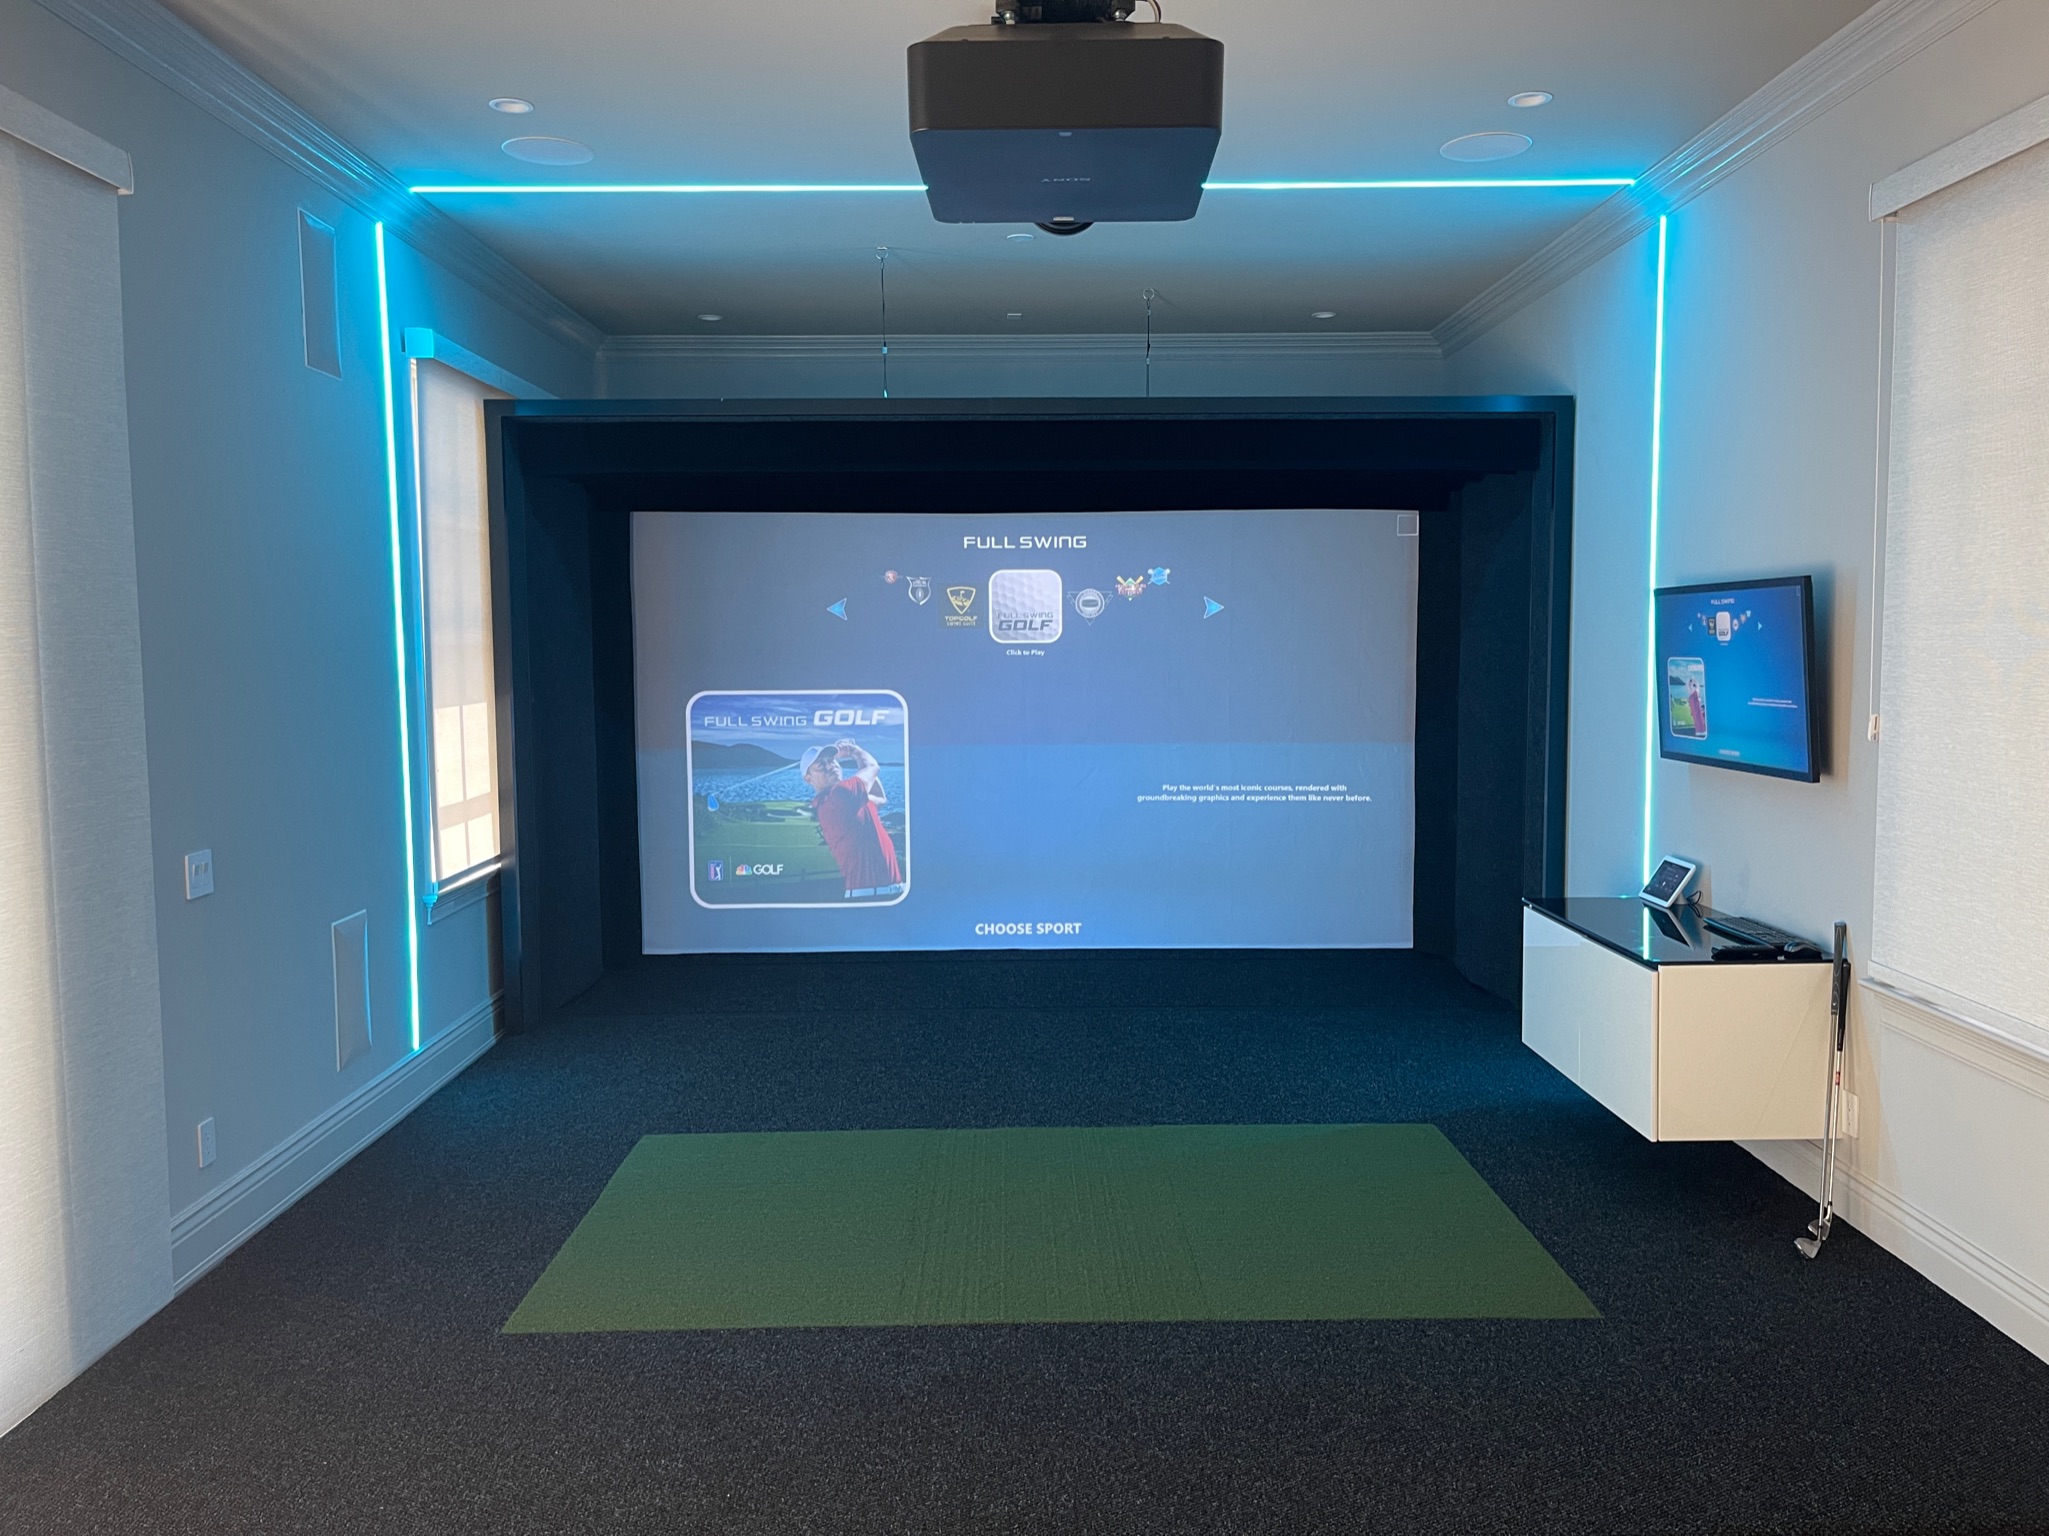 This was a fun room we designed adding linear lighting, oversized touch screen and a floating cabinet all controlled by Control4.